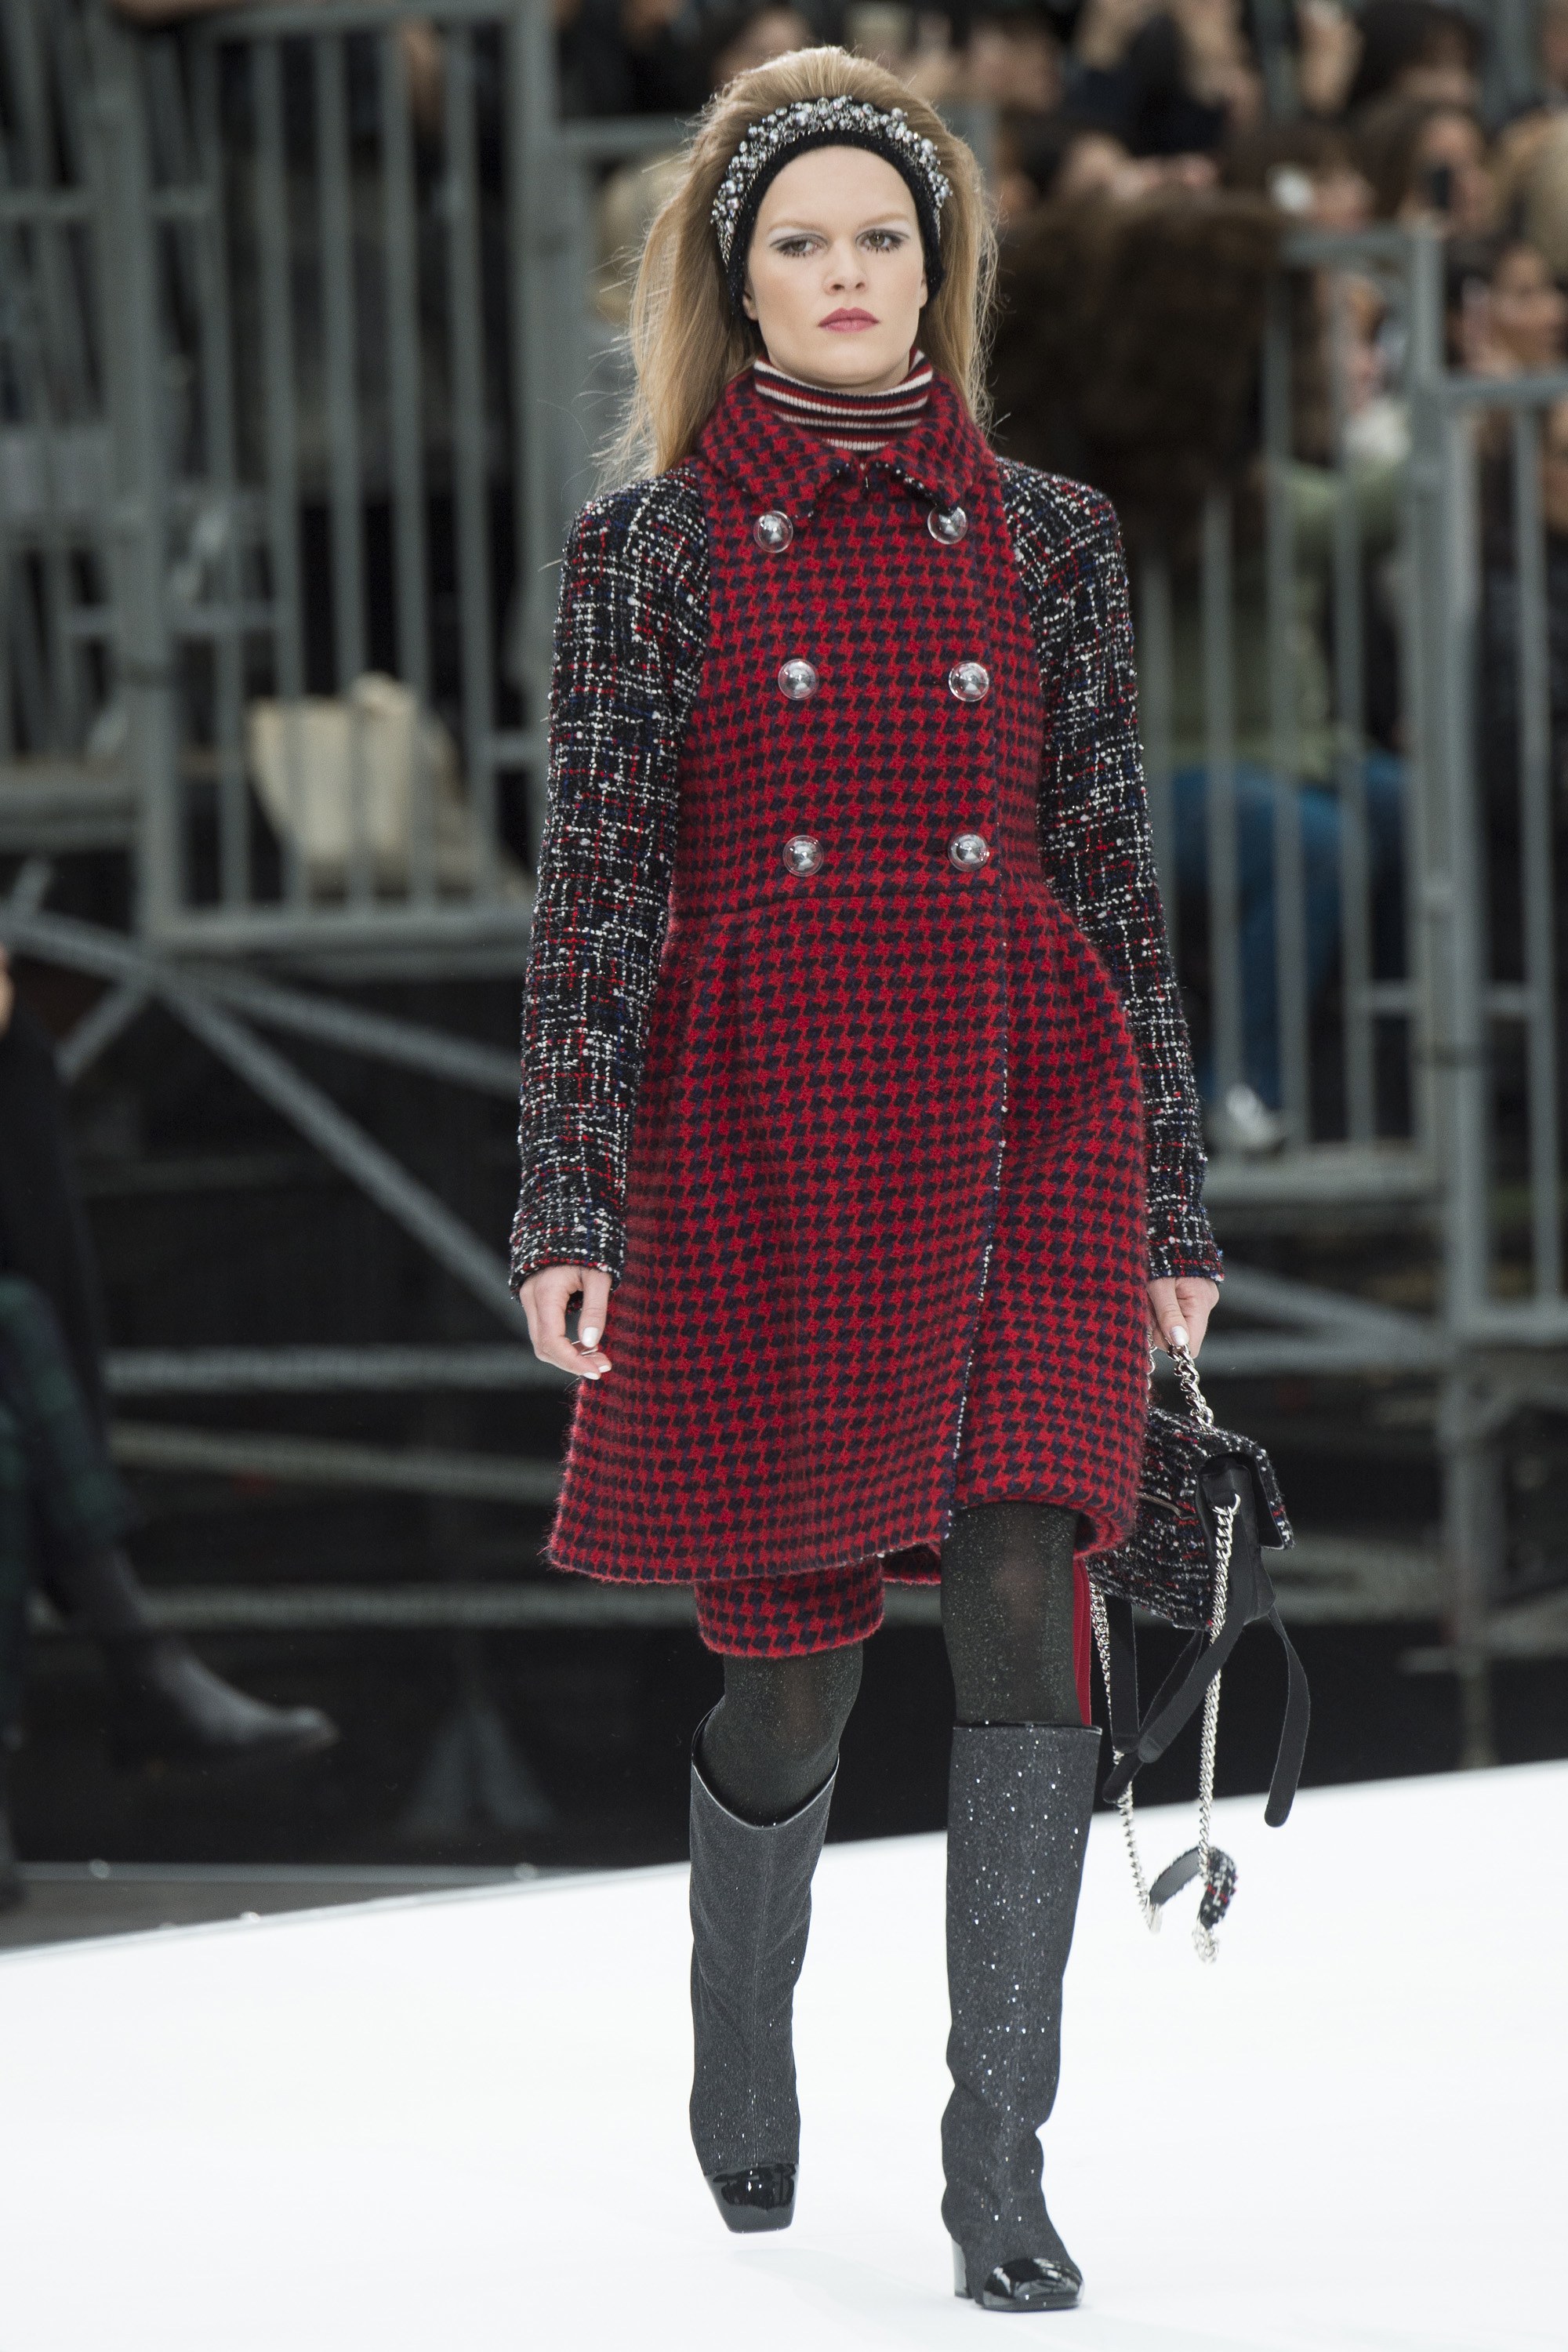 Glittery boots and space blankets: Chanel presents a vision for